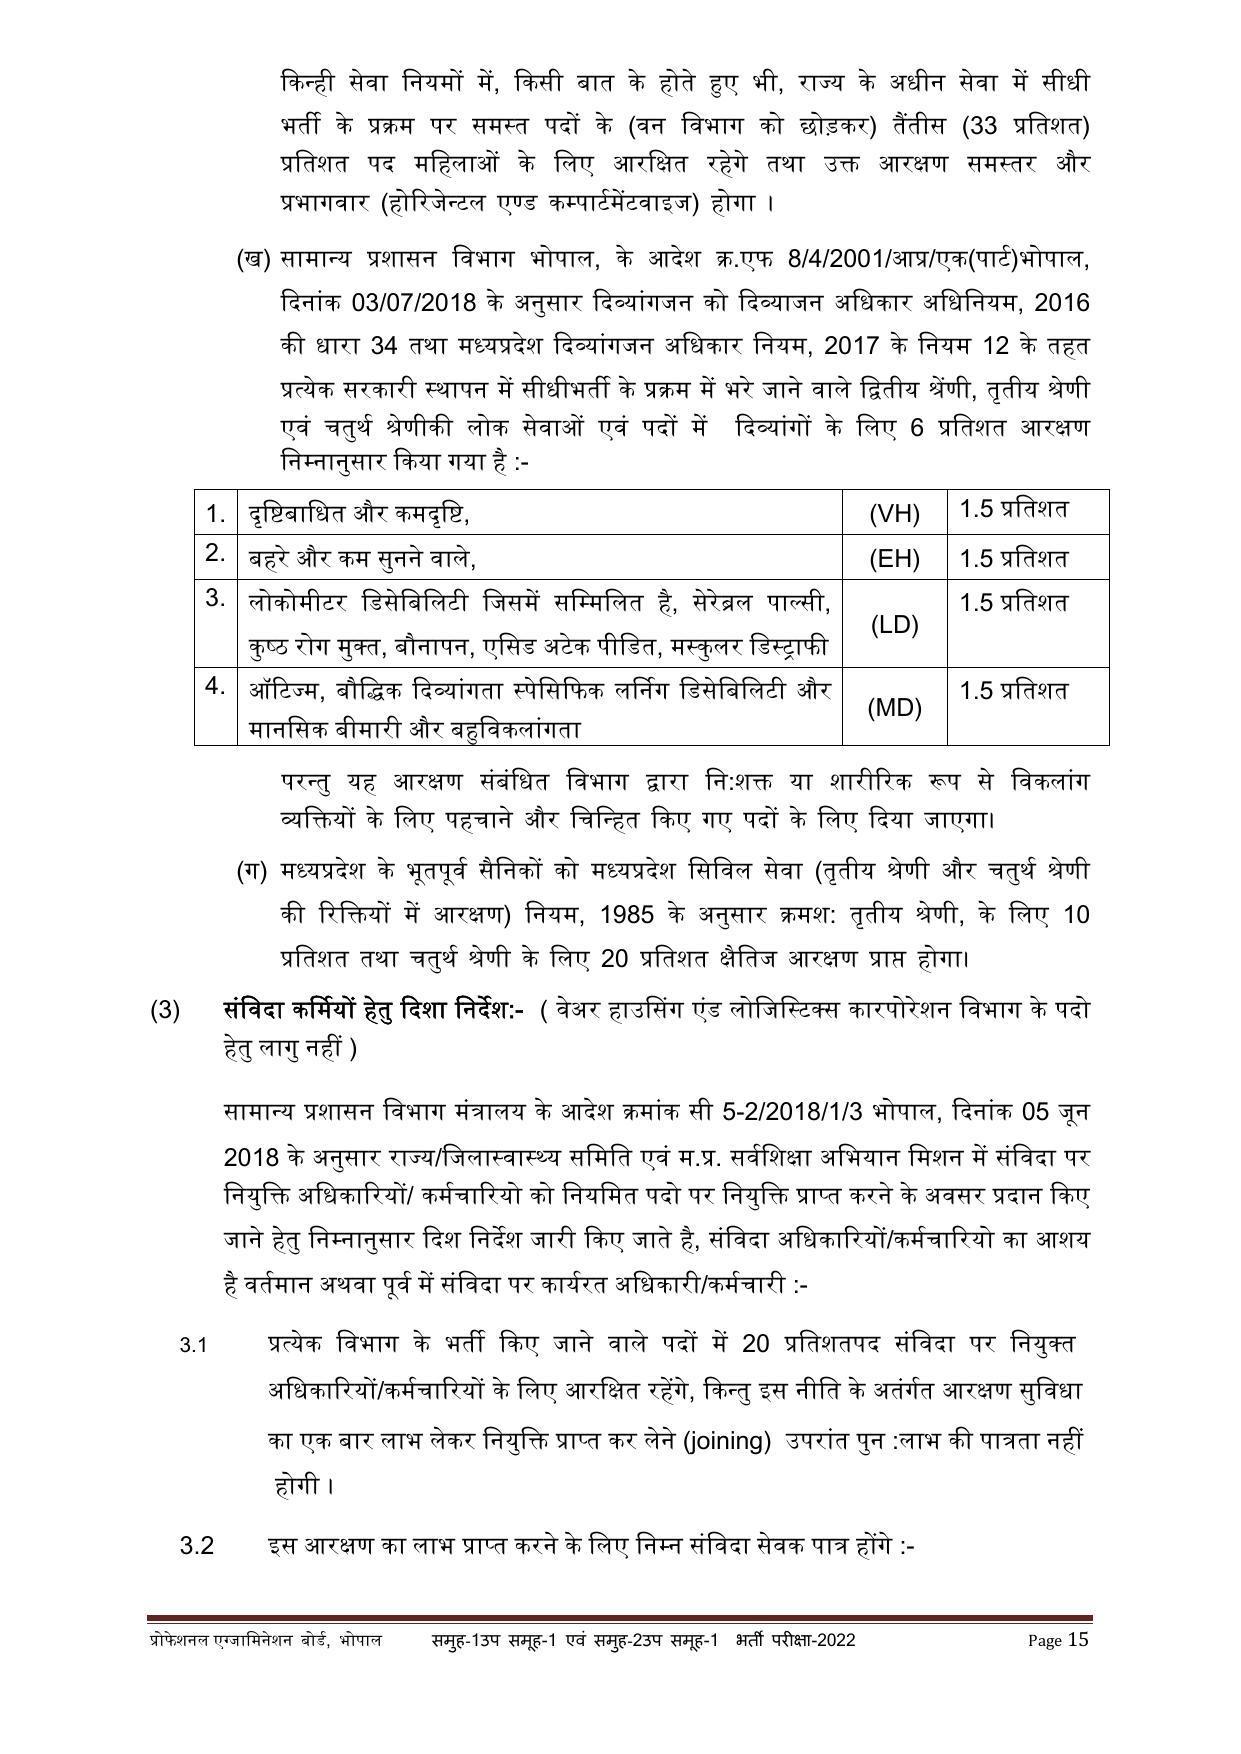 MPPEB Group-I Sub Group-I & Group-II Sub Group-I Recruitment 2022 - Page 22